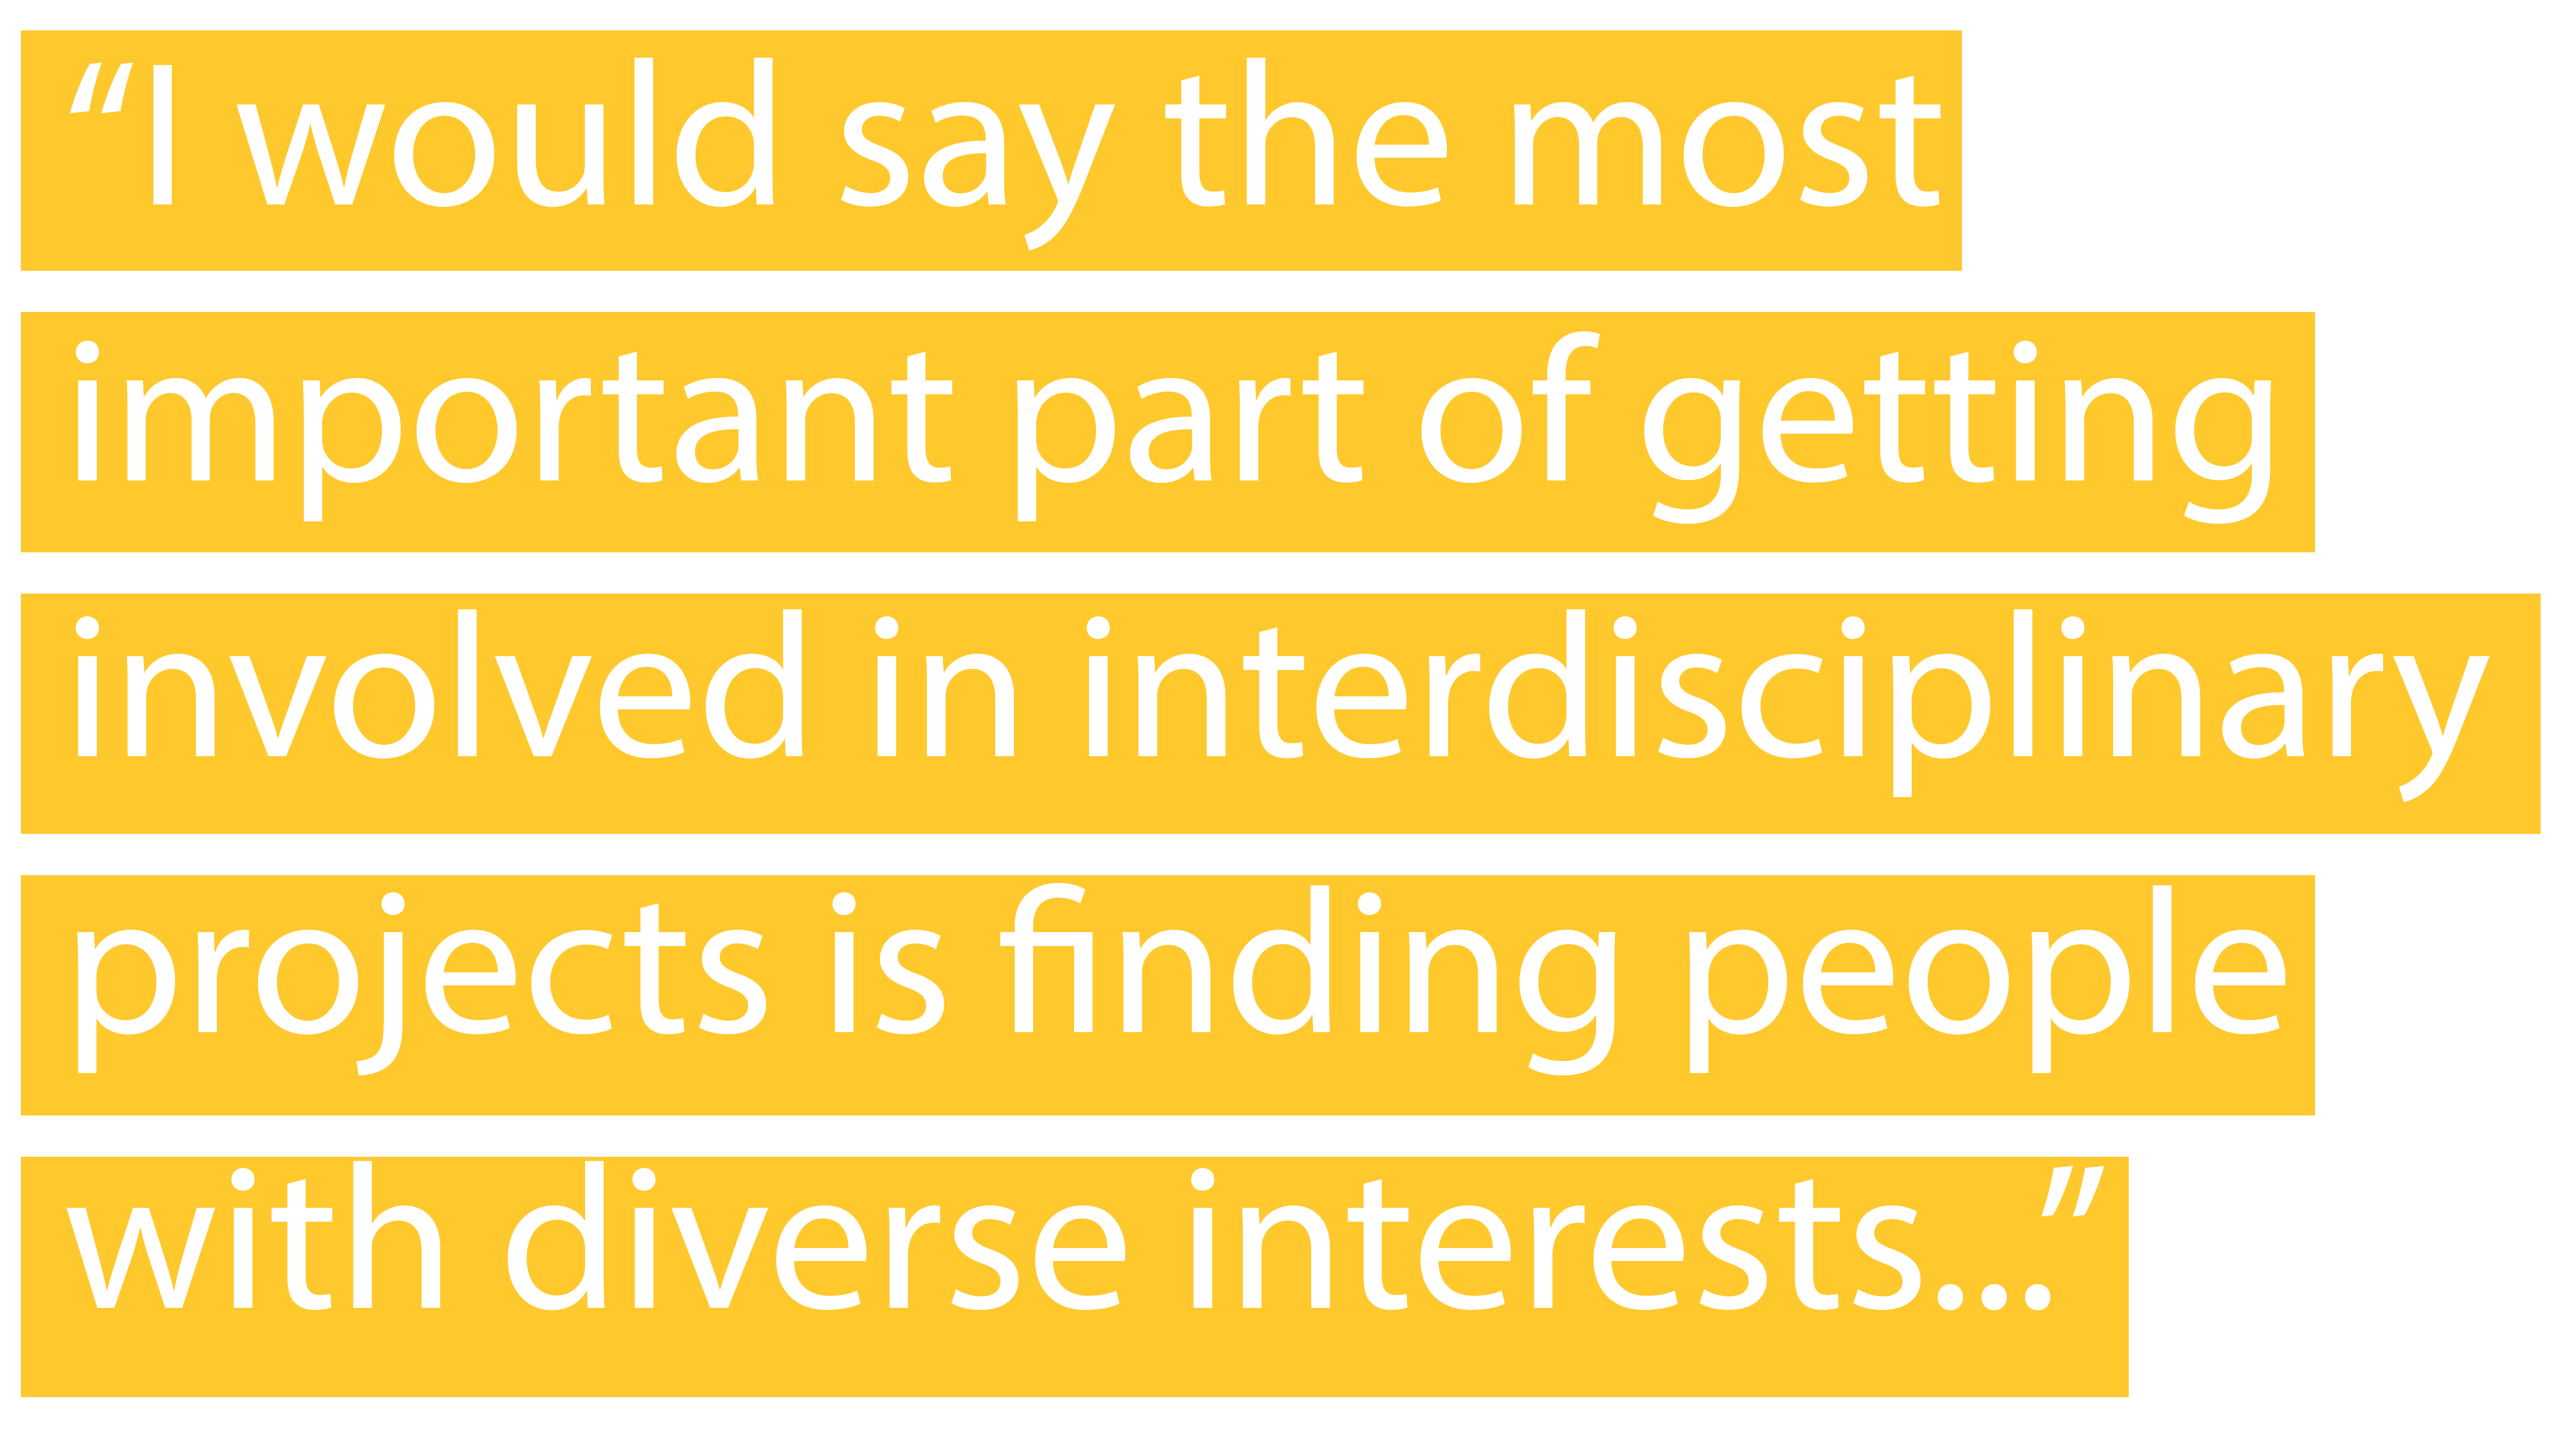 "I would say the most important part of getting involved in interdisciplinary projects is finding people with diverse interests"